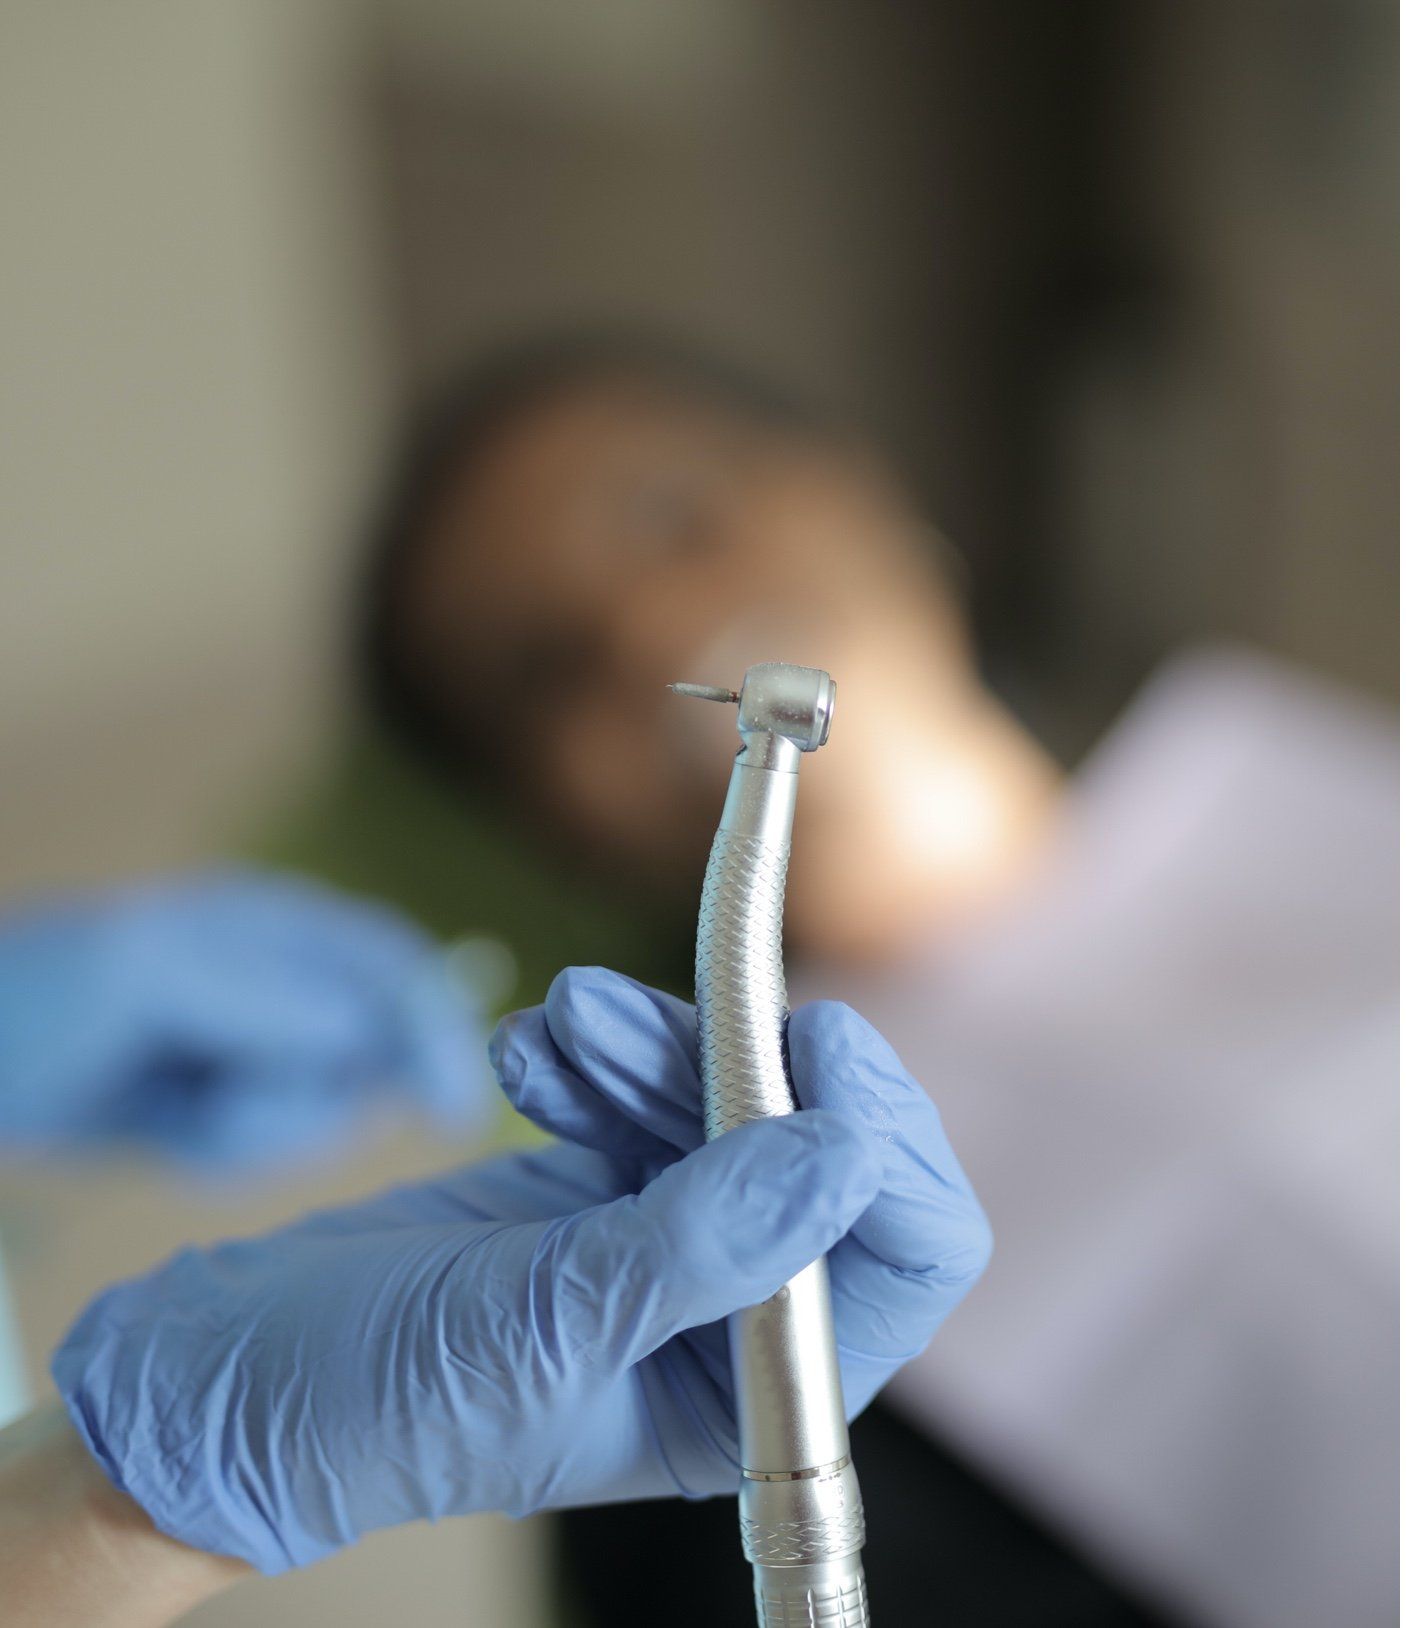 a person wearing blue gloves is holding a dental drill in front of a patient .